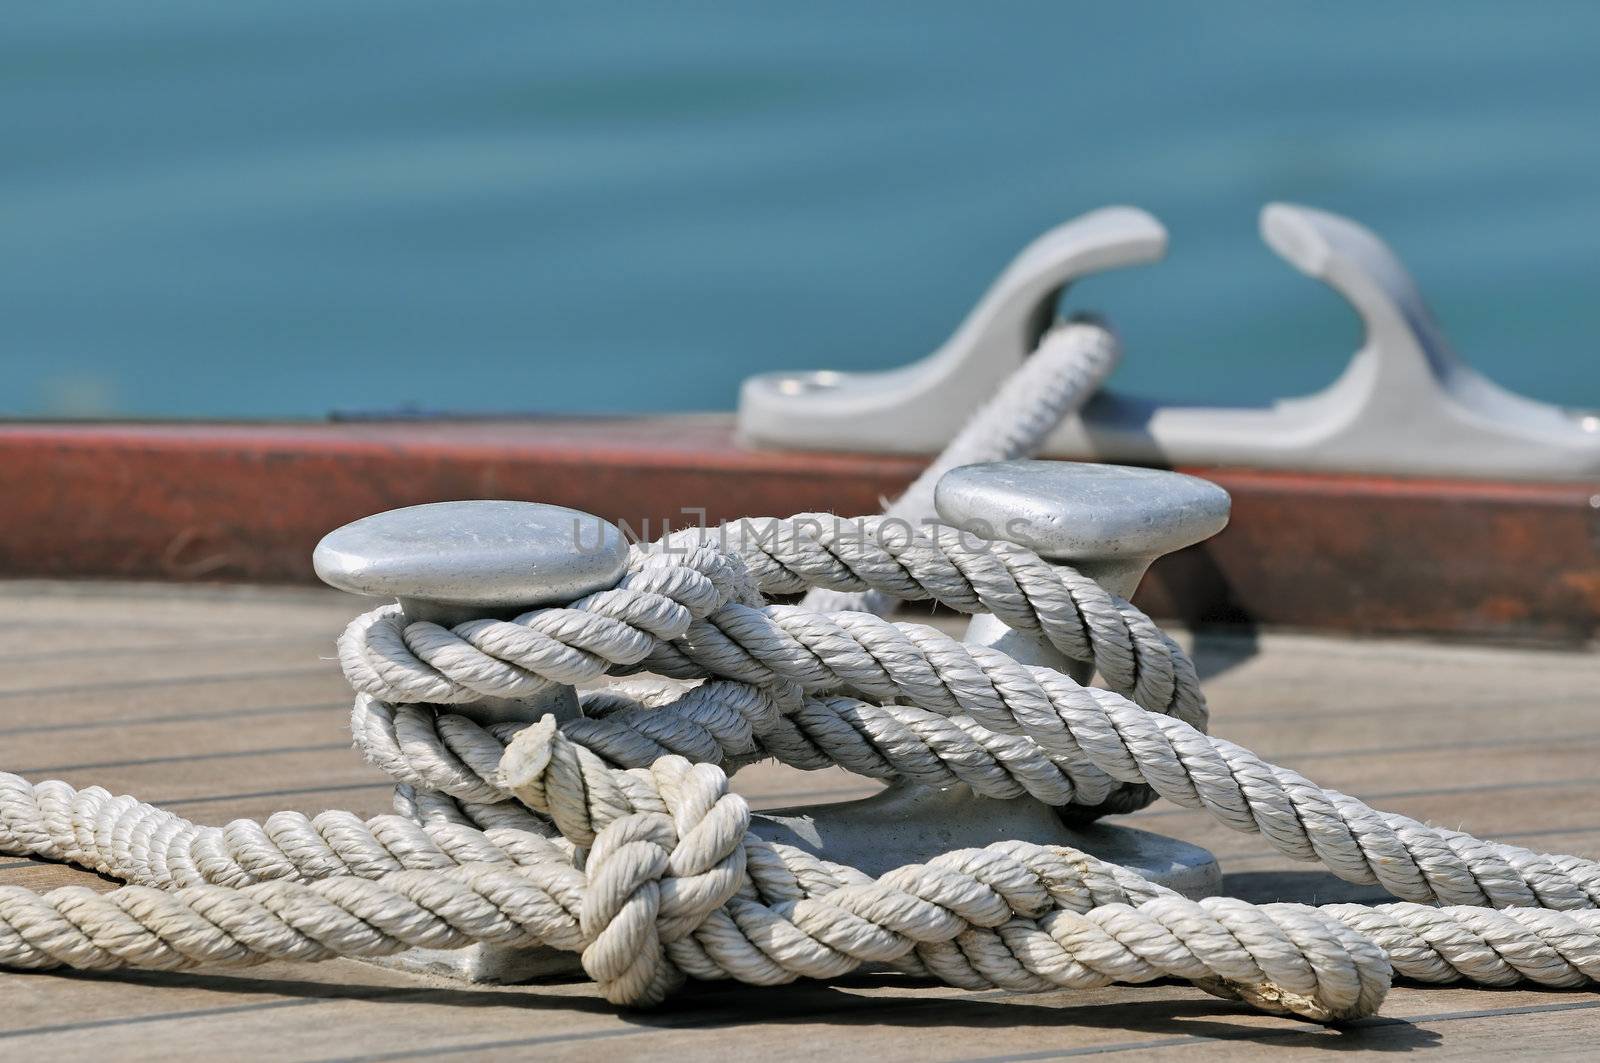 Close-up of rope tied up on a bitt